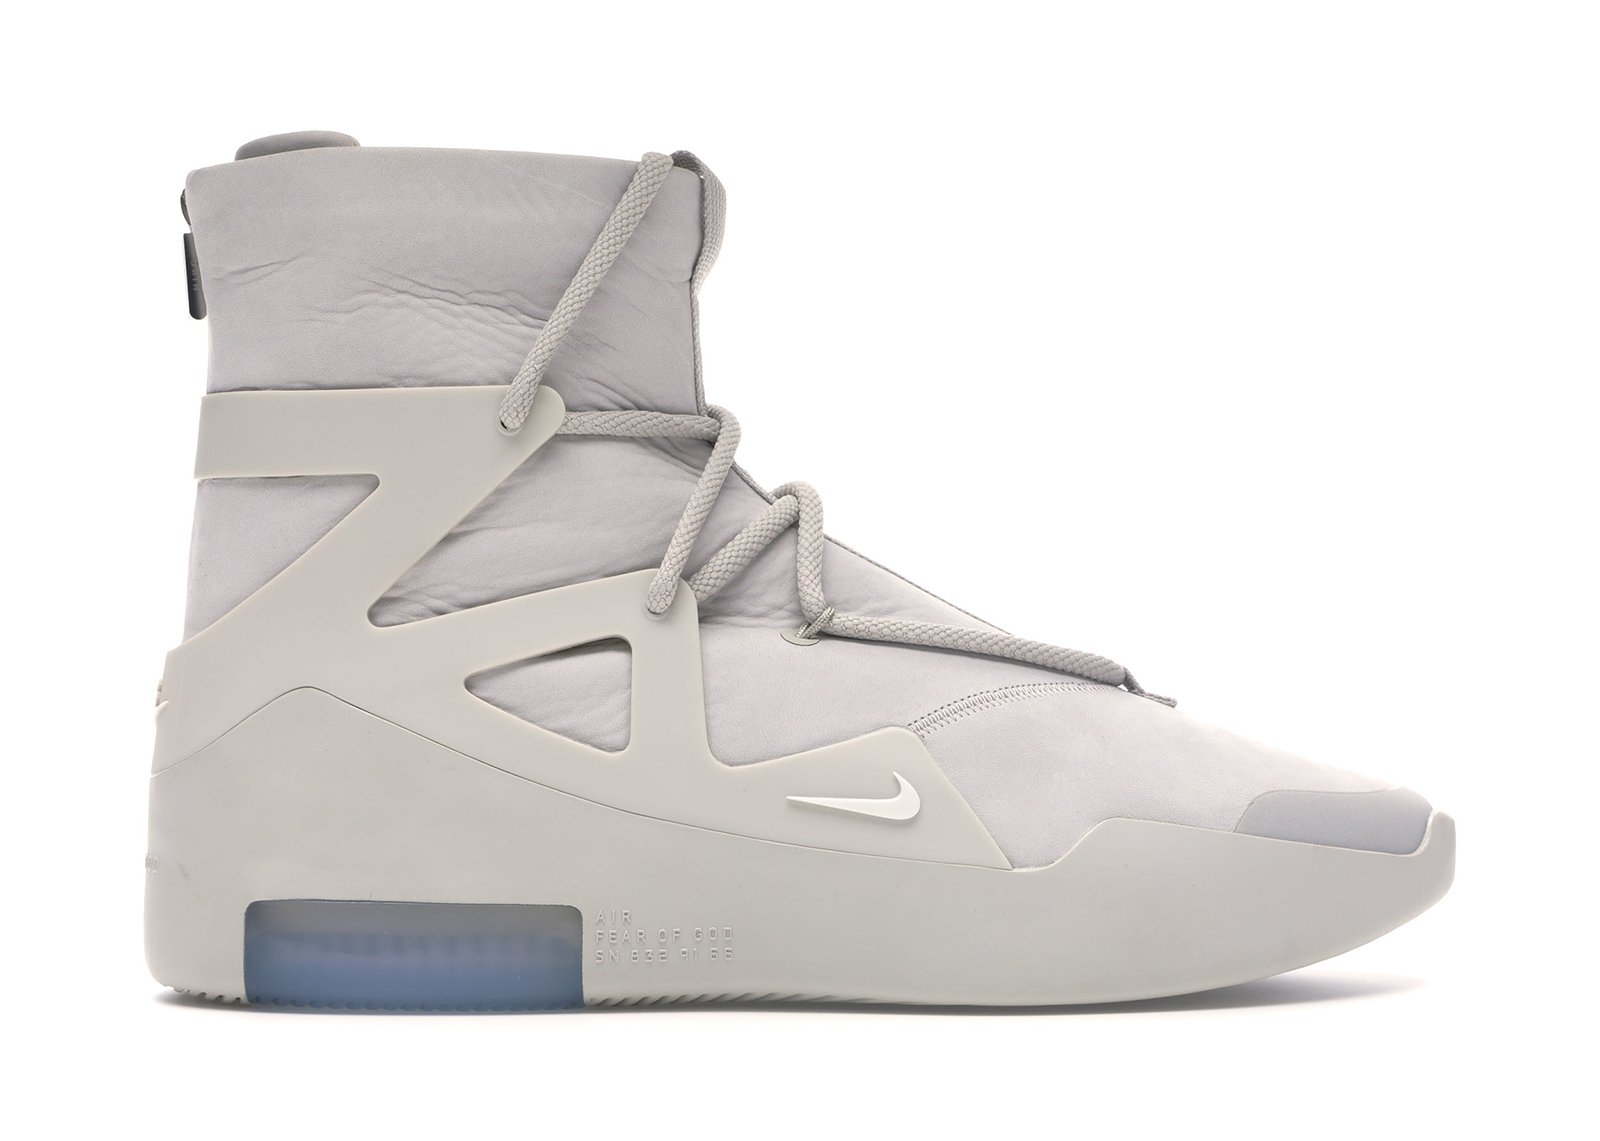 sneakers Nike Air Fear Of God 1 Light Bone (Friends and Family)